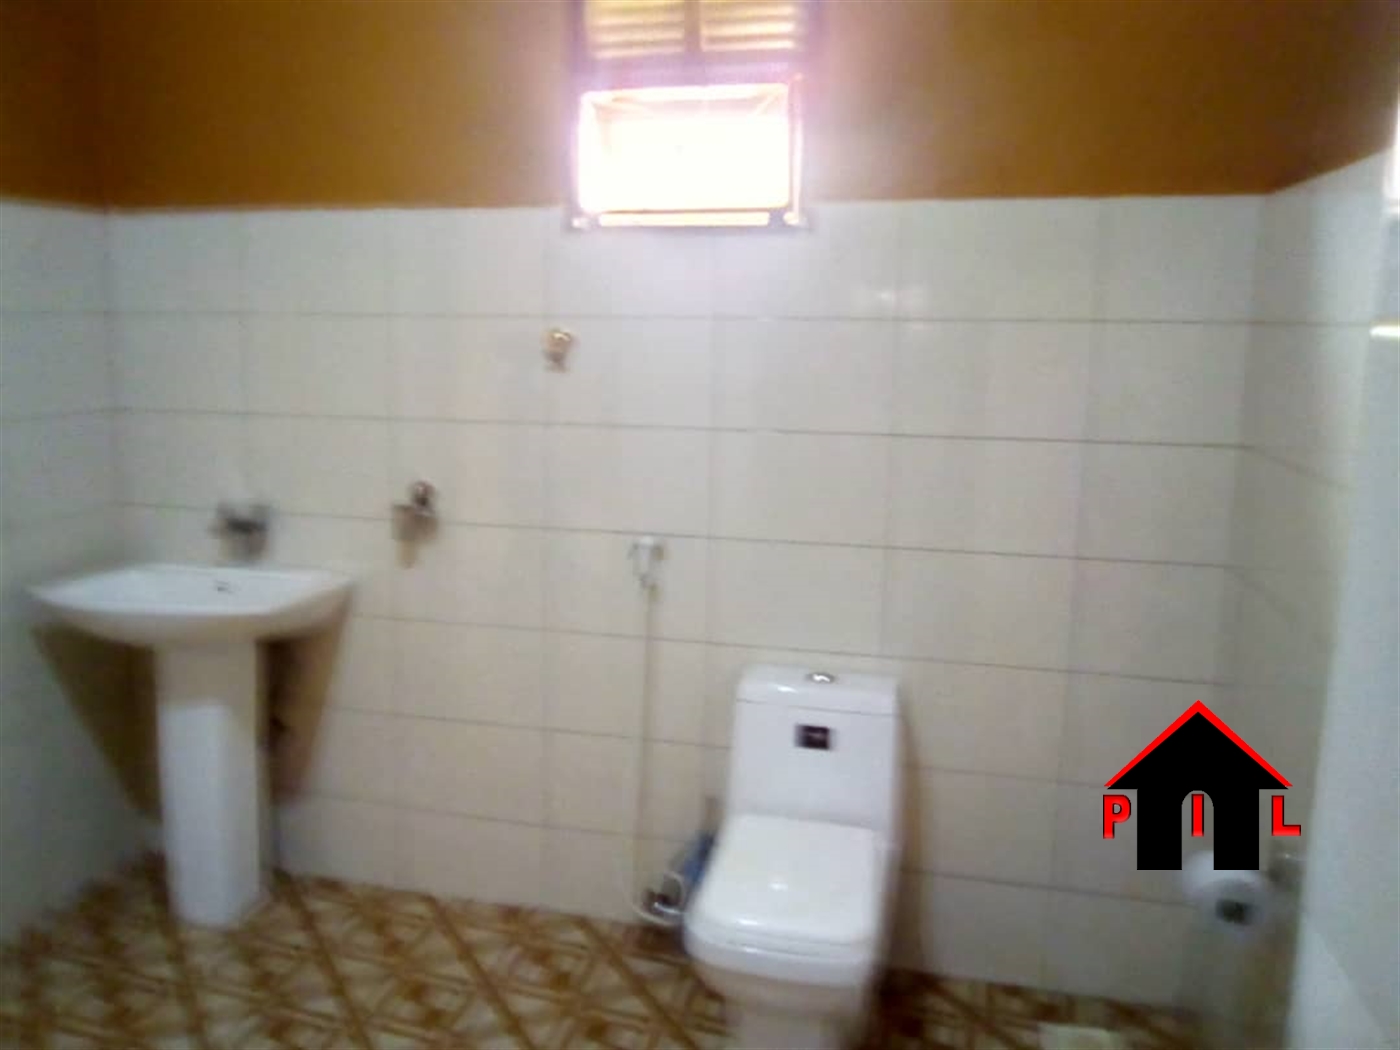 Bungalow for sale in Kyampisi Mukono